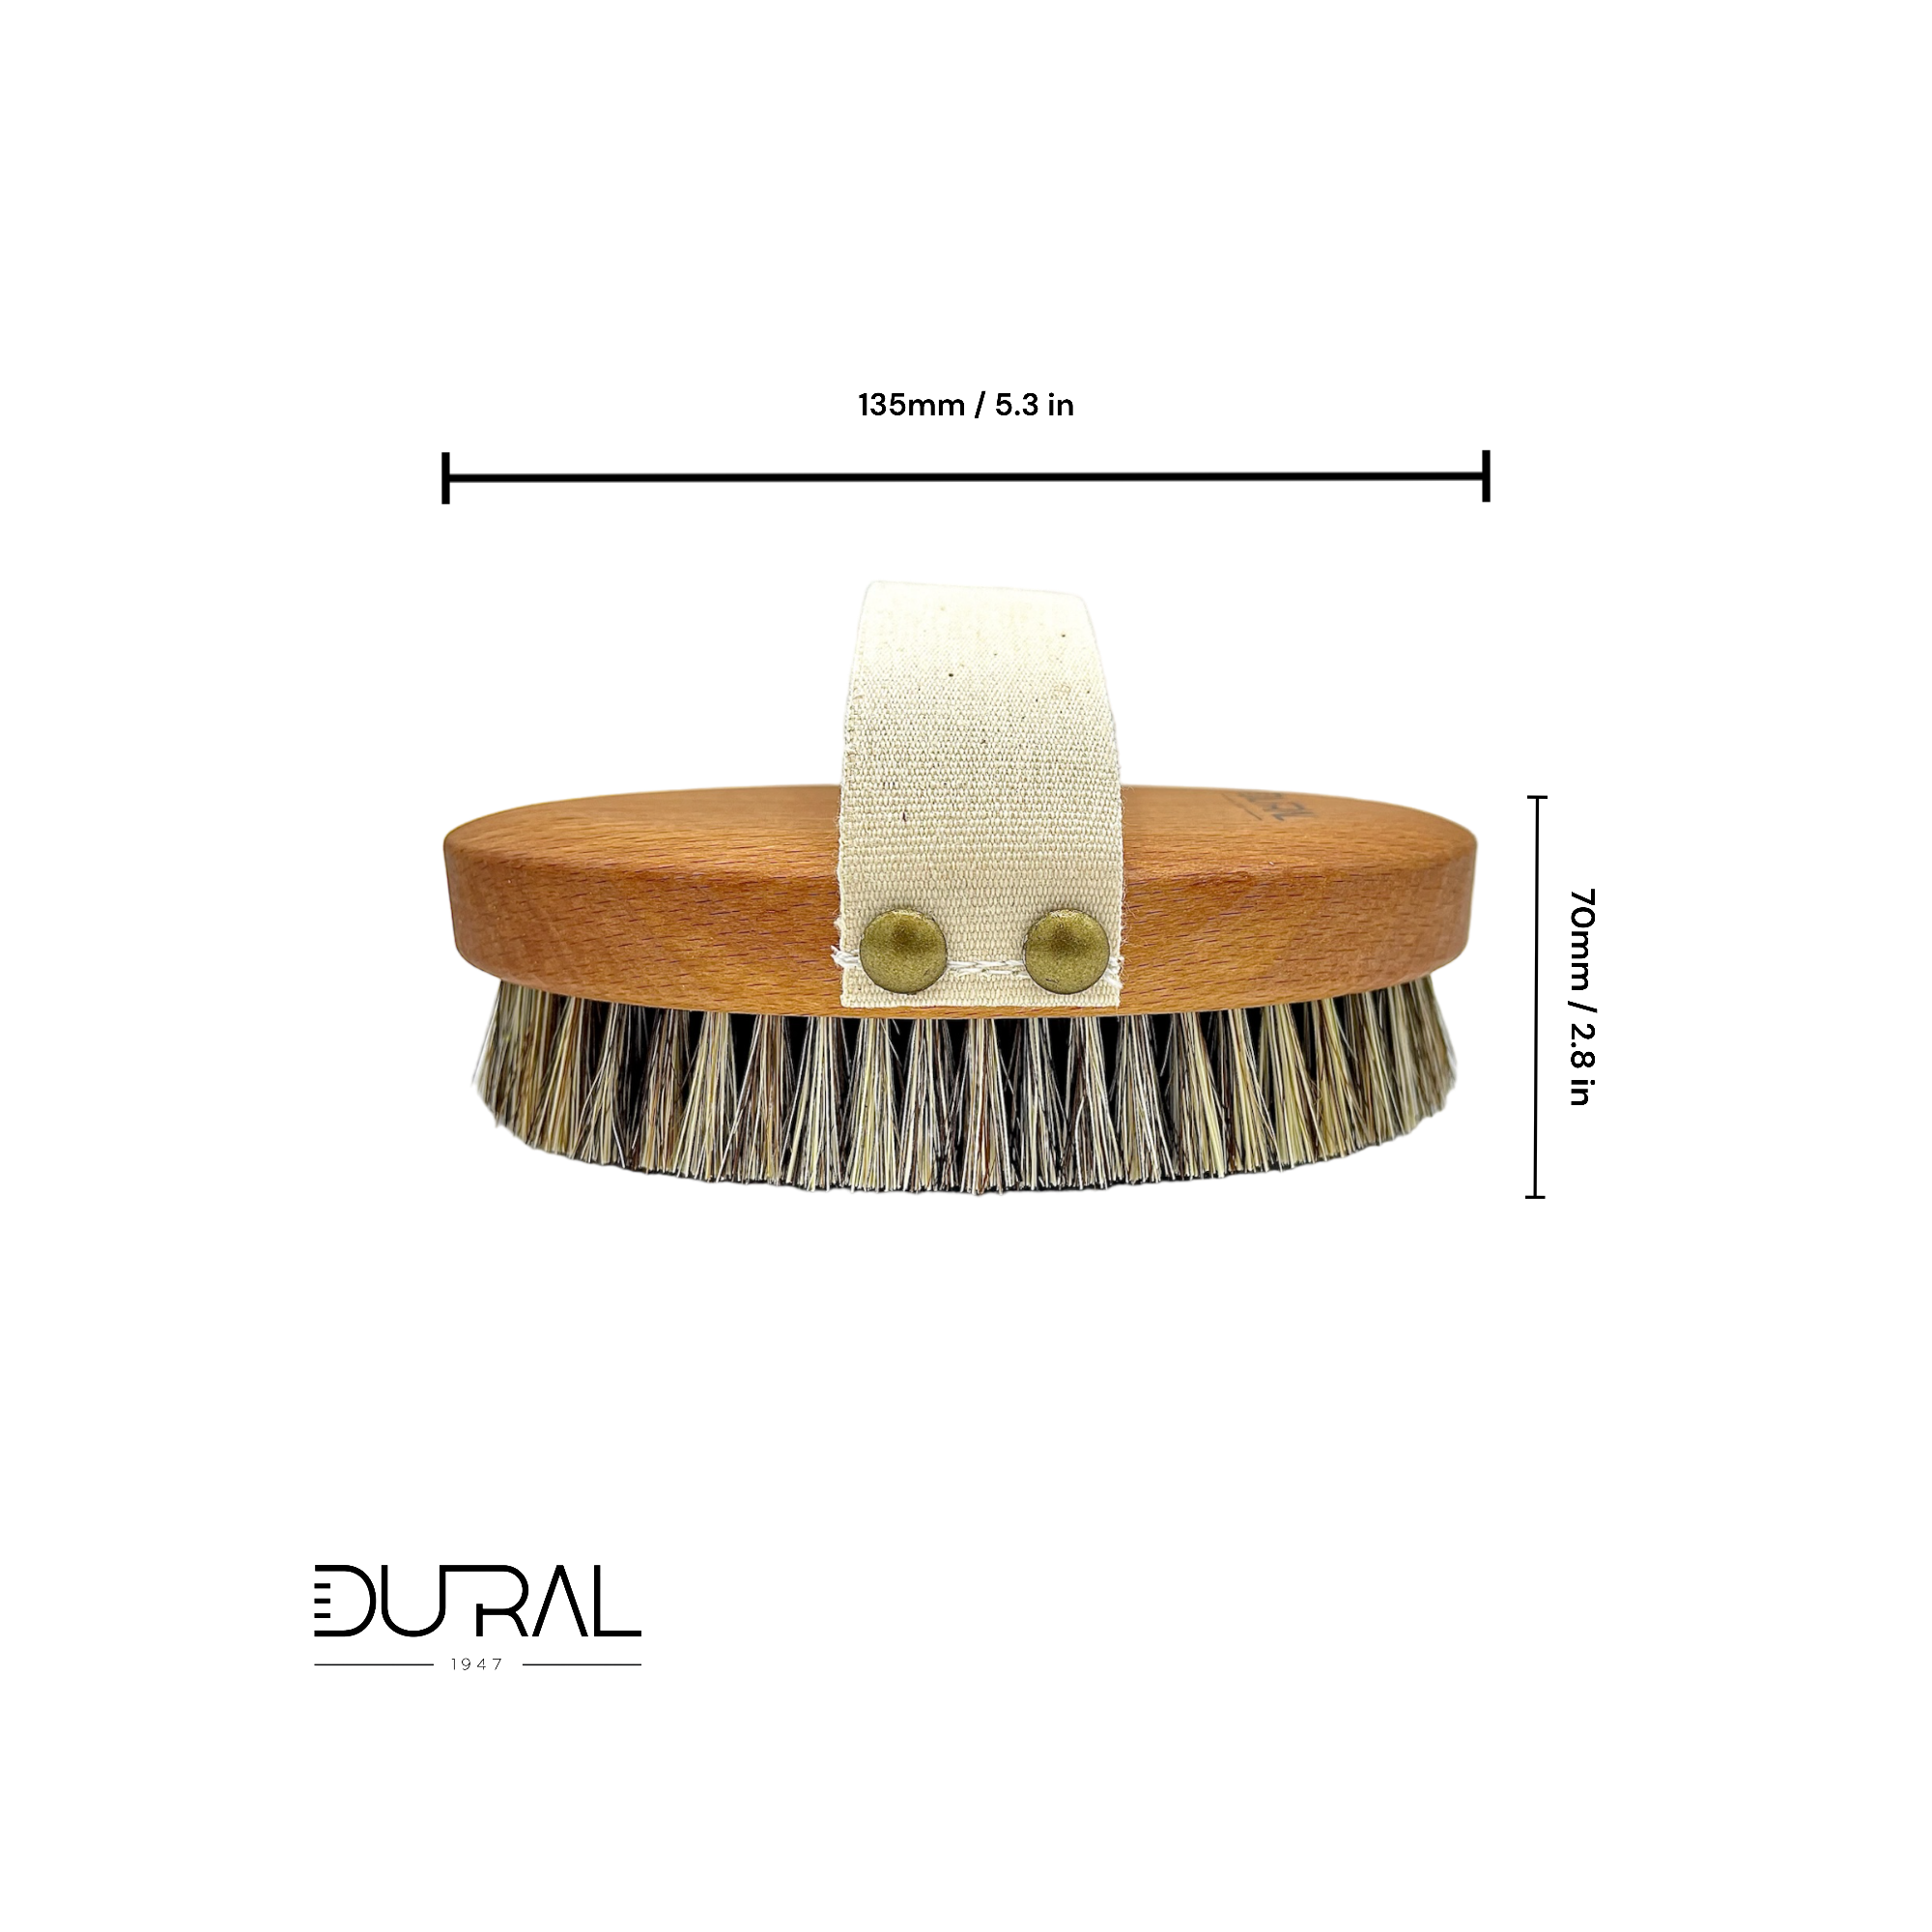 Dural Beech wood wellness brush with horse hair and Tampico fiber